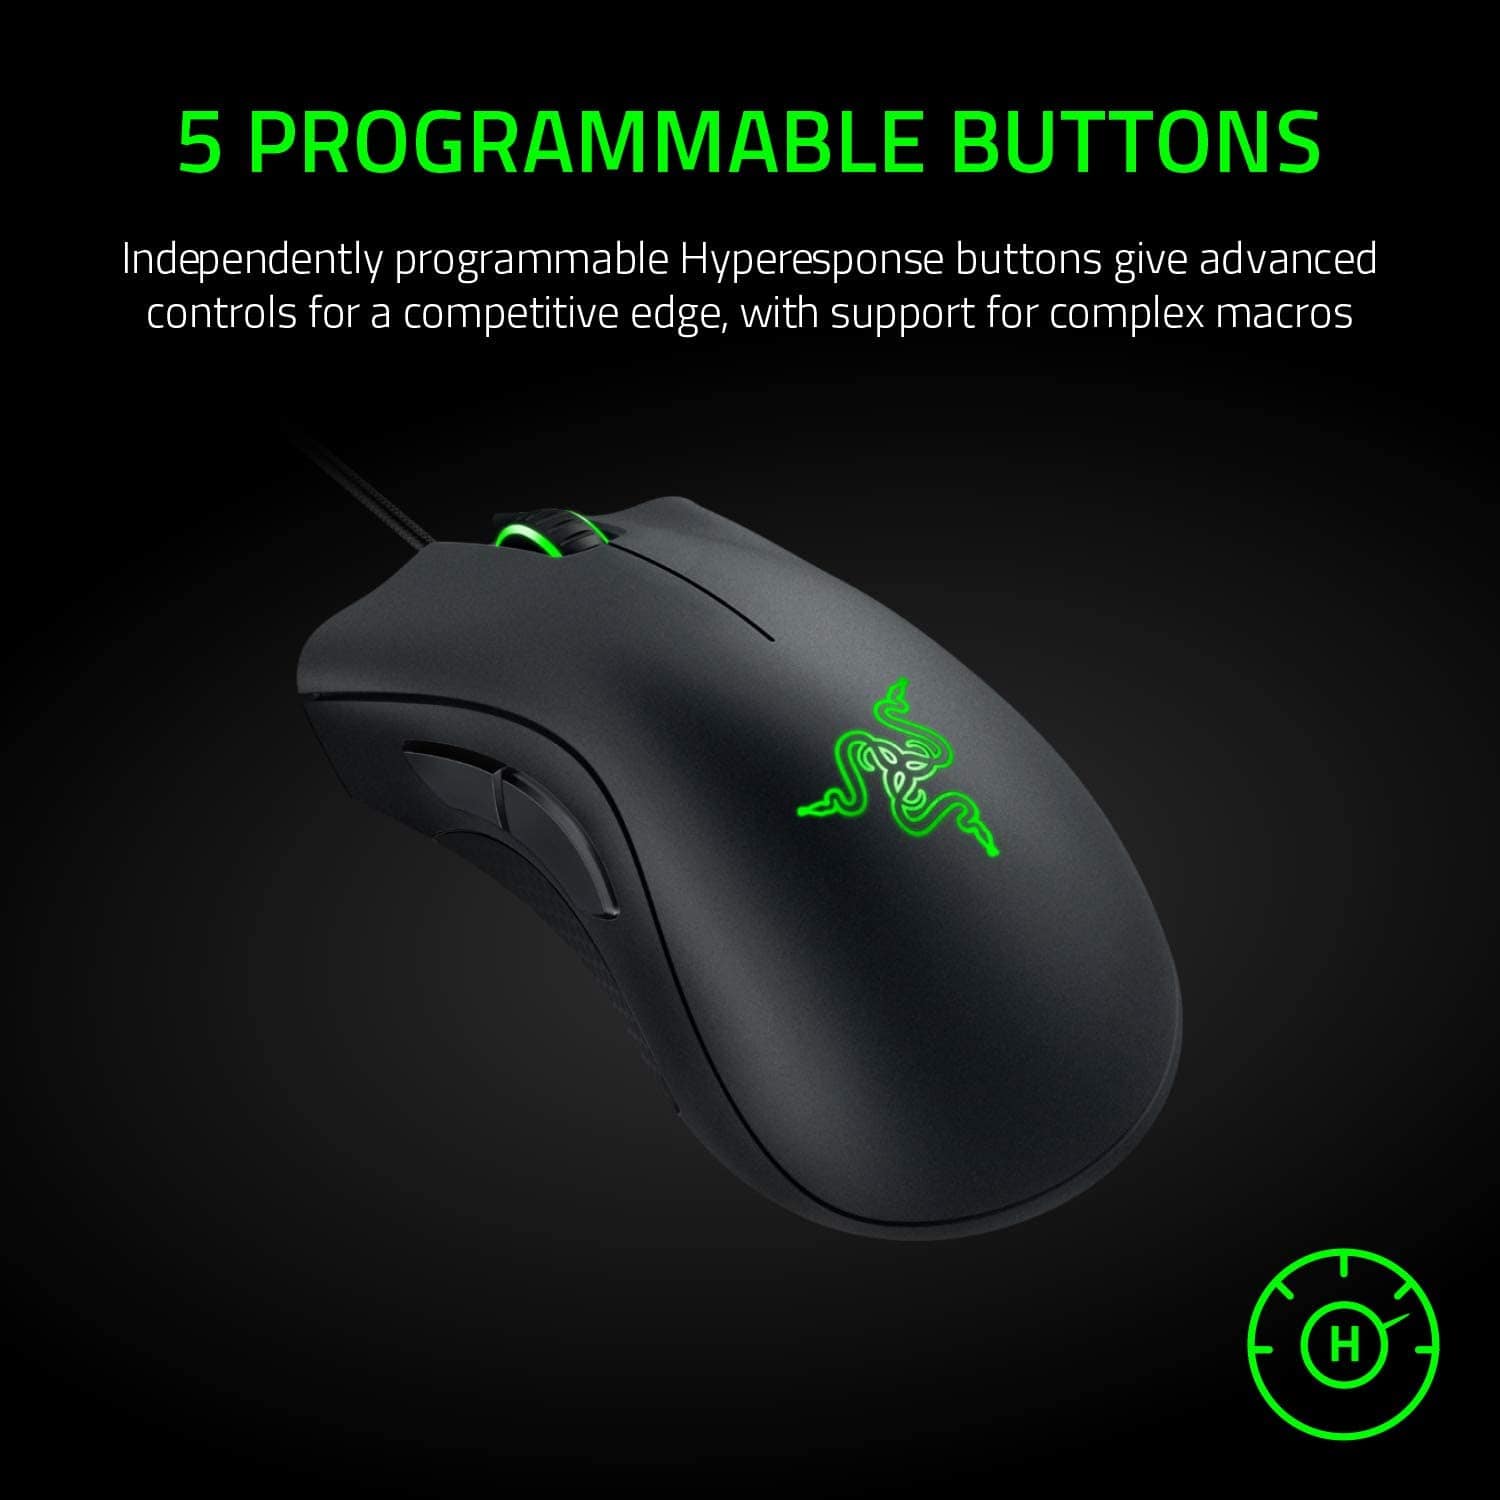 Deal Alert: Razer DeathAdder Essential Gaming Mouse now selling at a discounted price